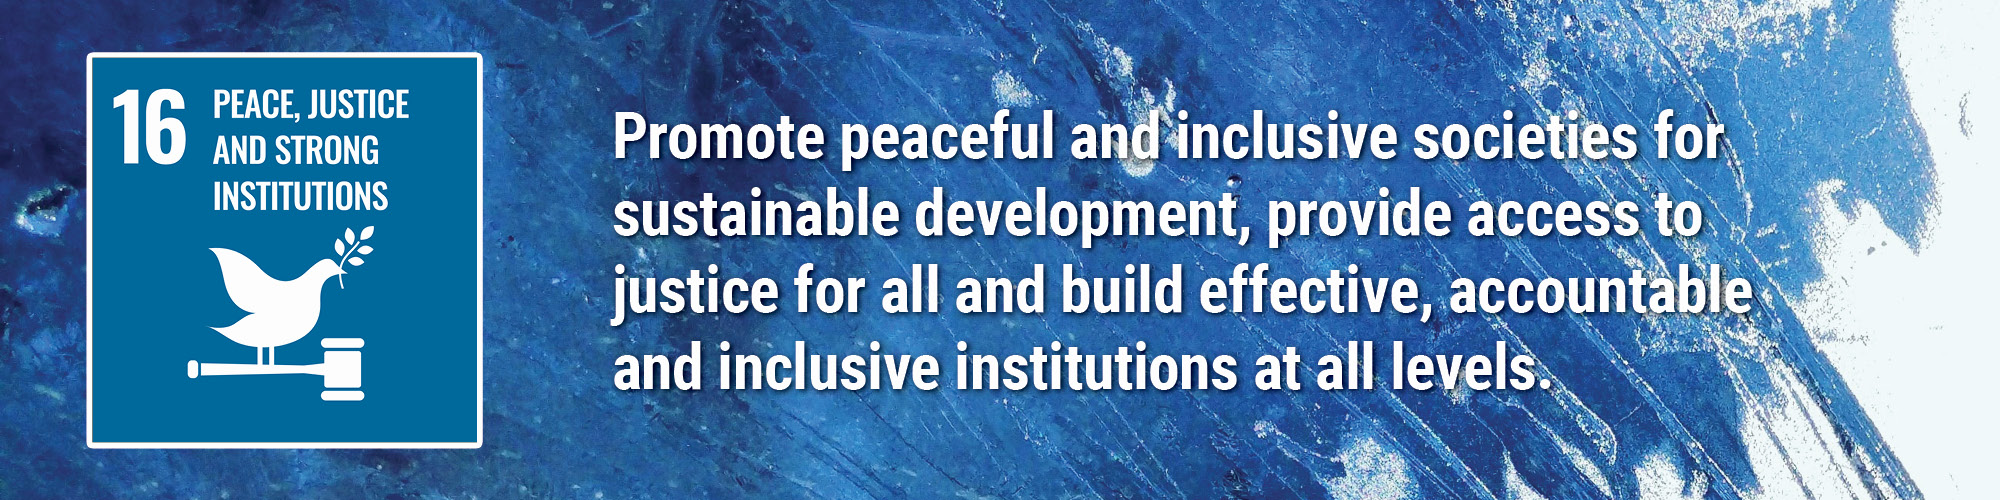 Promote peaceful and inclusive societies for sustainable development, provide access to justice for all and build effective, accountable and inclusive institutions at all levels.